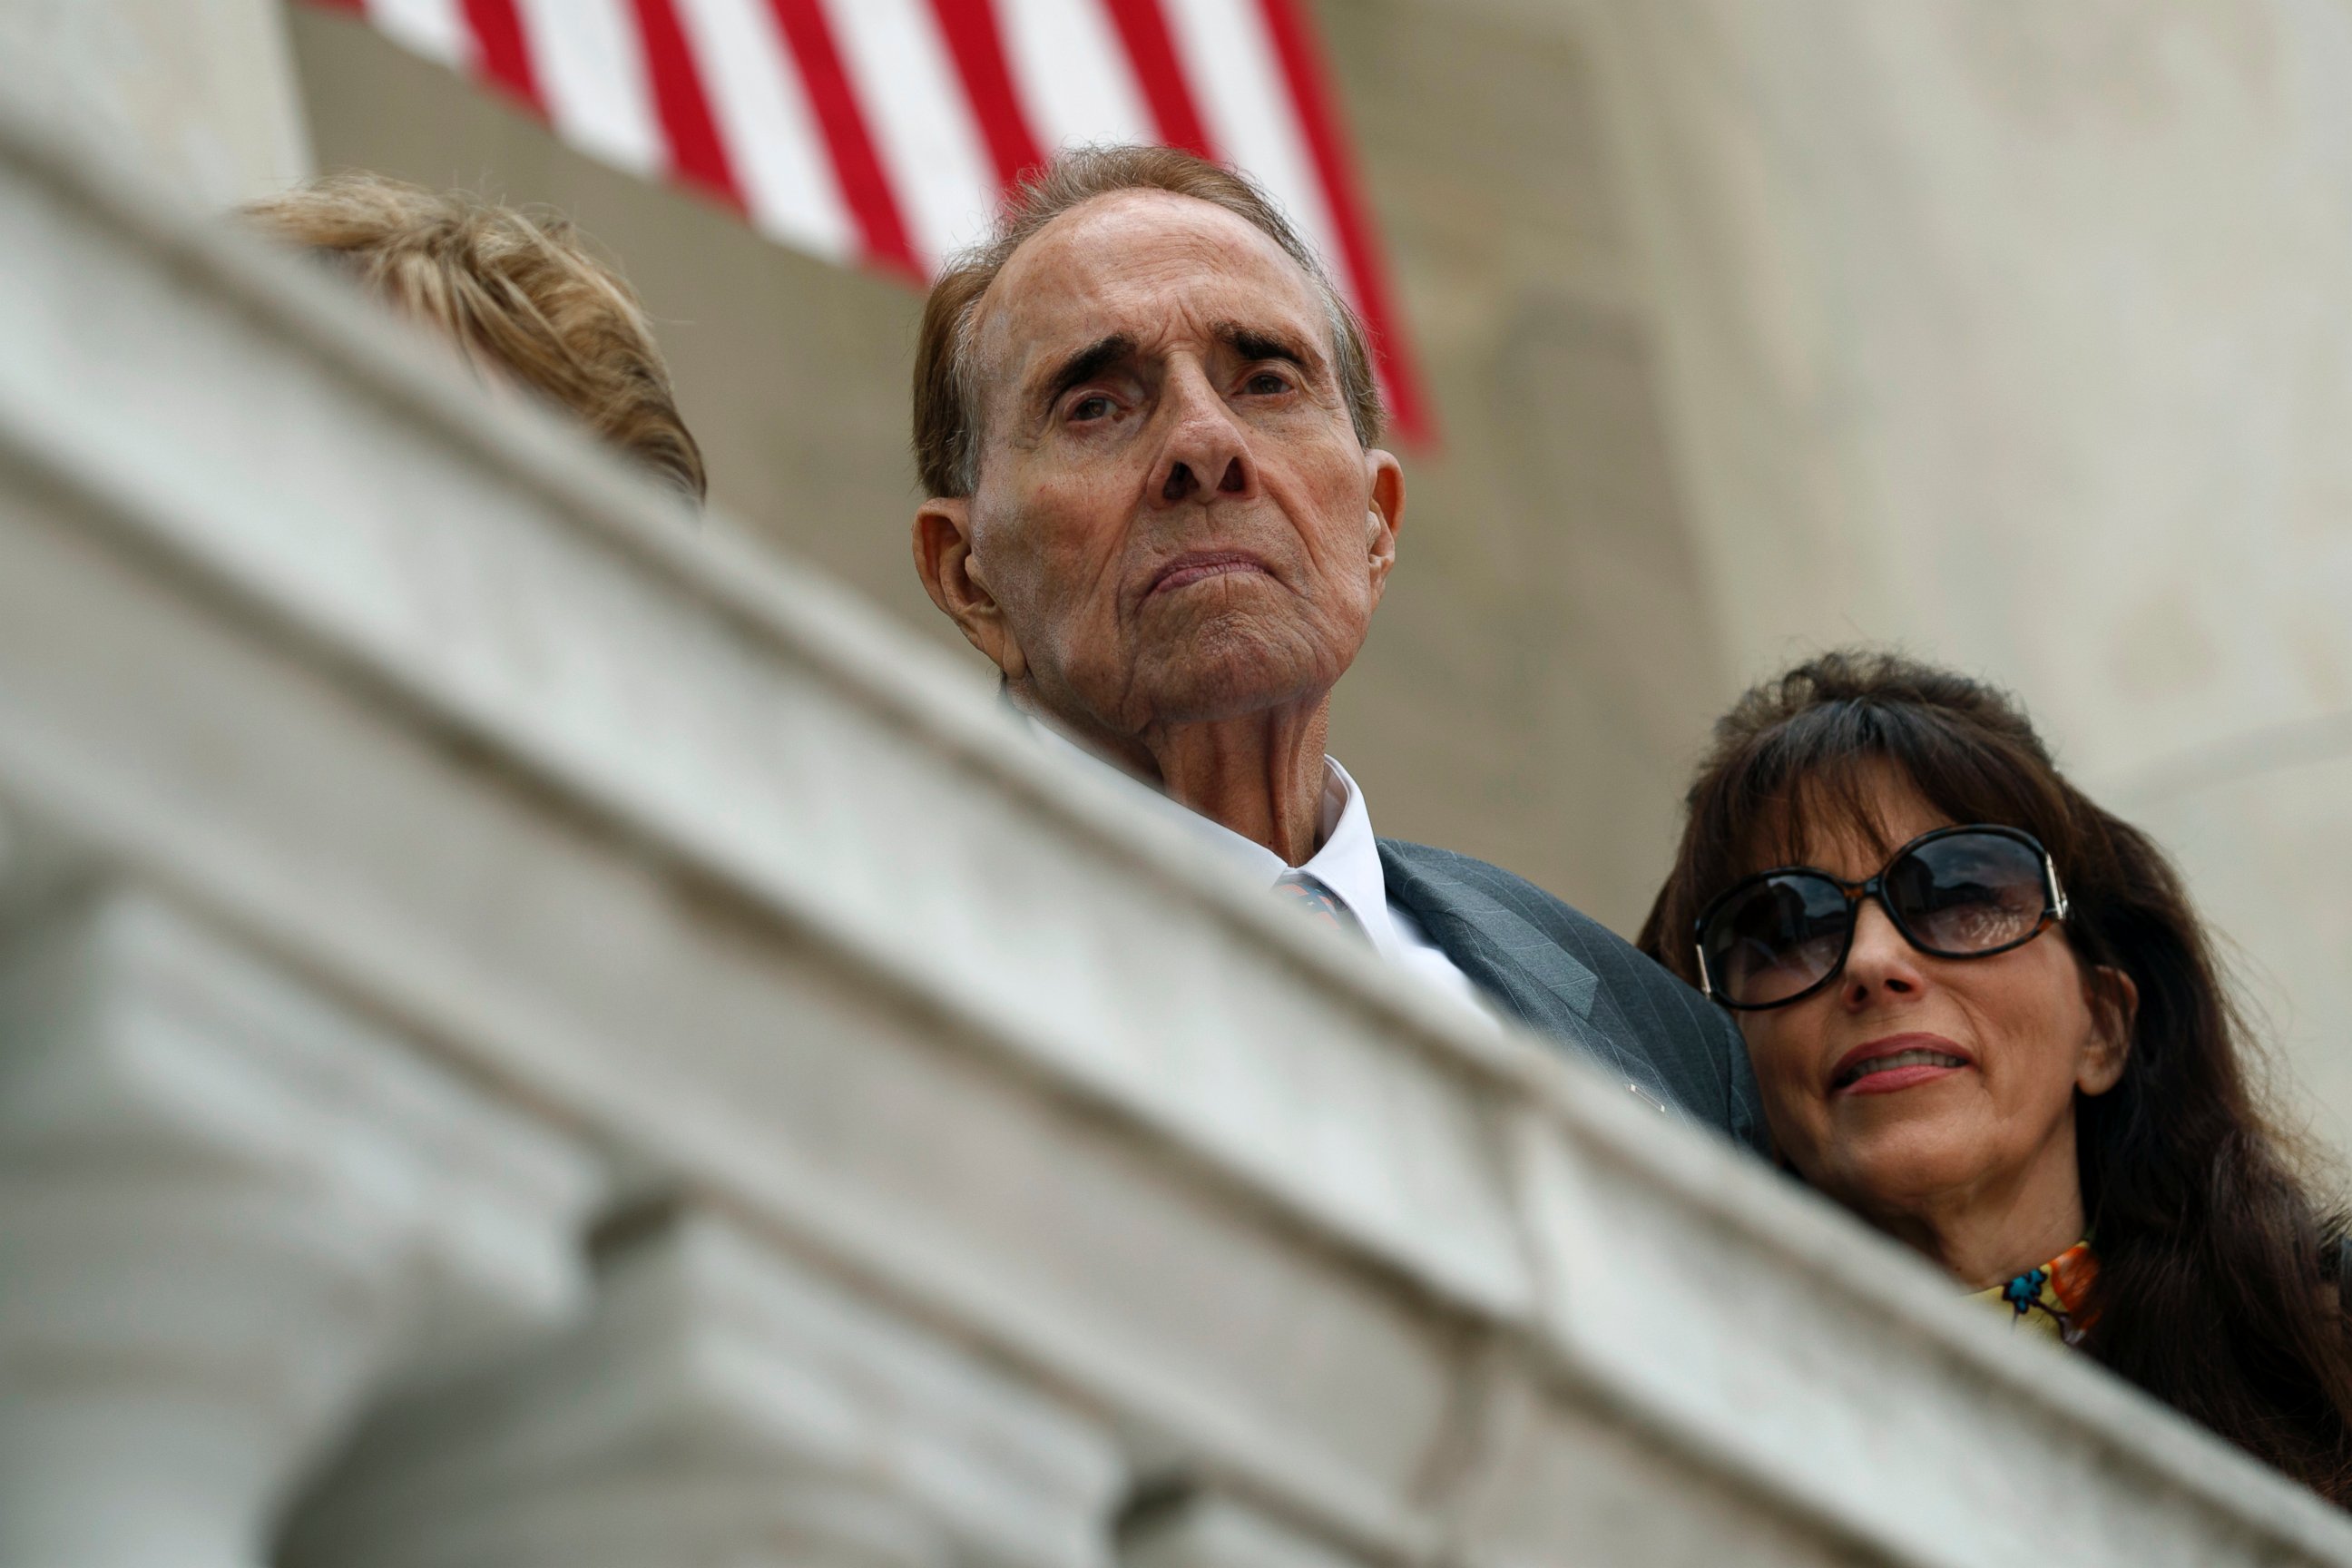 In this May 29, 2017 file photo former Republican presidential candidate and U.S. Senate Majority Leader Sen. Bob Dole watches as President Donald Trump speaks during a Memorial Day ceremony at Arlington National Cemetery, in Arlington, Va.